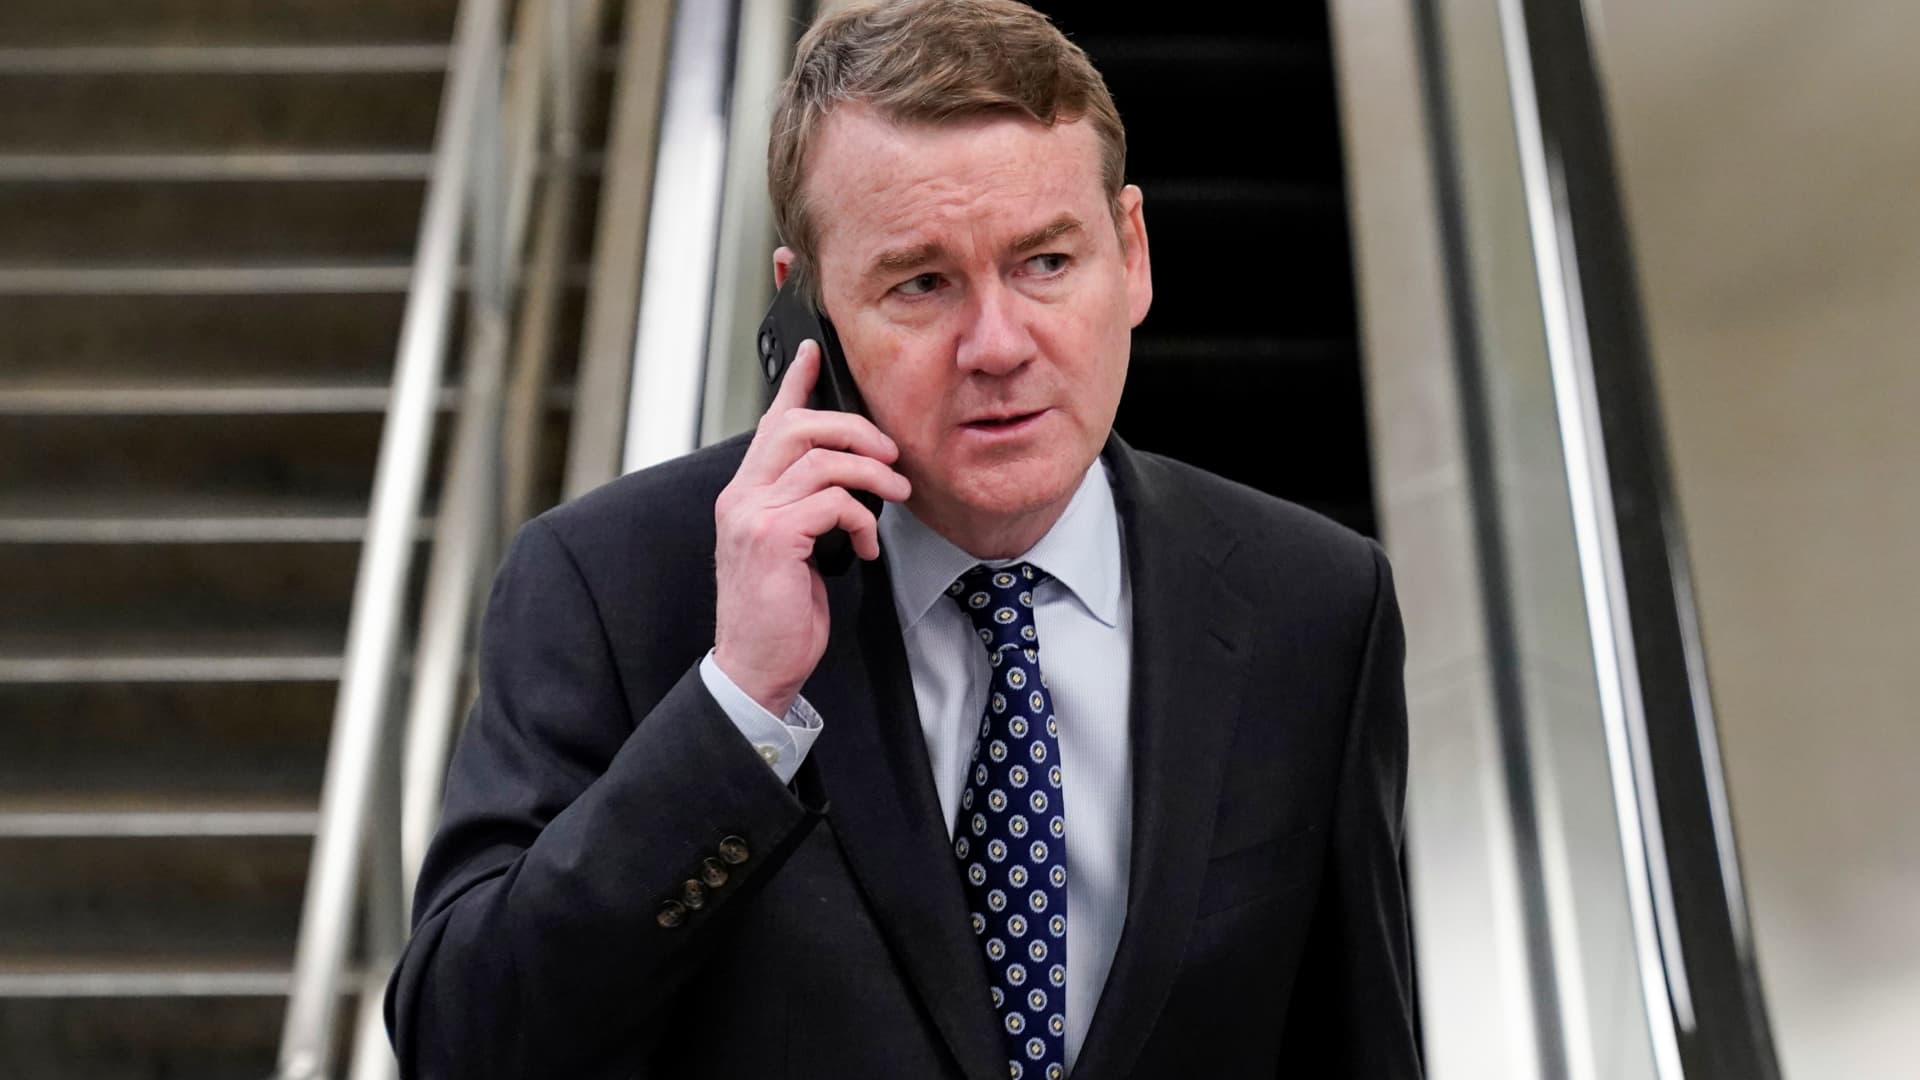 Senator Michael Bennet (D-CO) speaks on a mobile phone after a vote the day after the shooting at Robb Elementary School in Uvalde, Texas, on Capitol Hill in Washington, May 25, 2022.